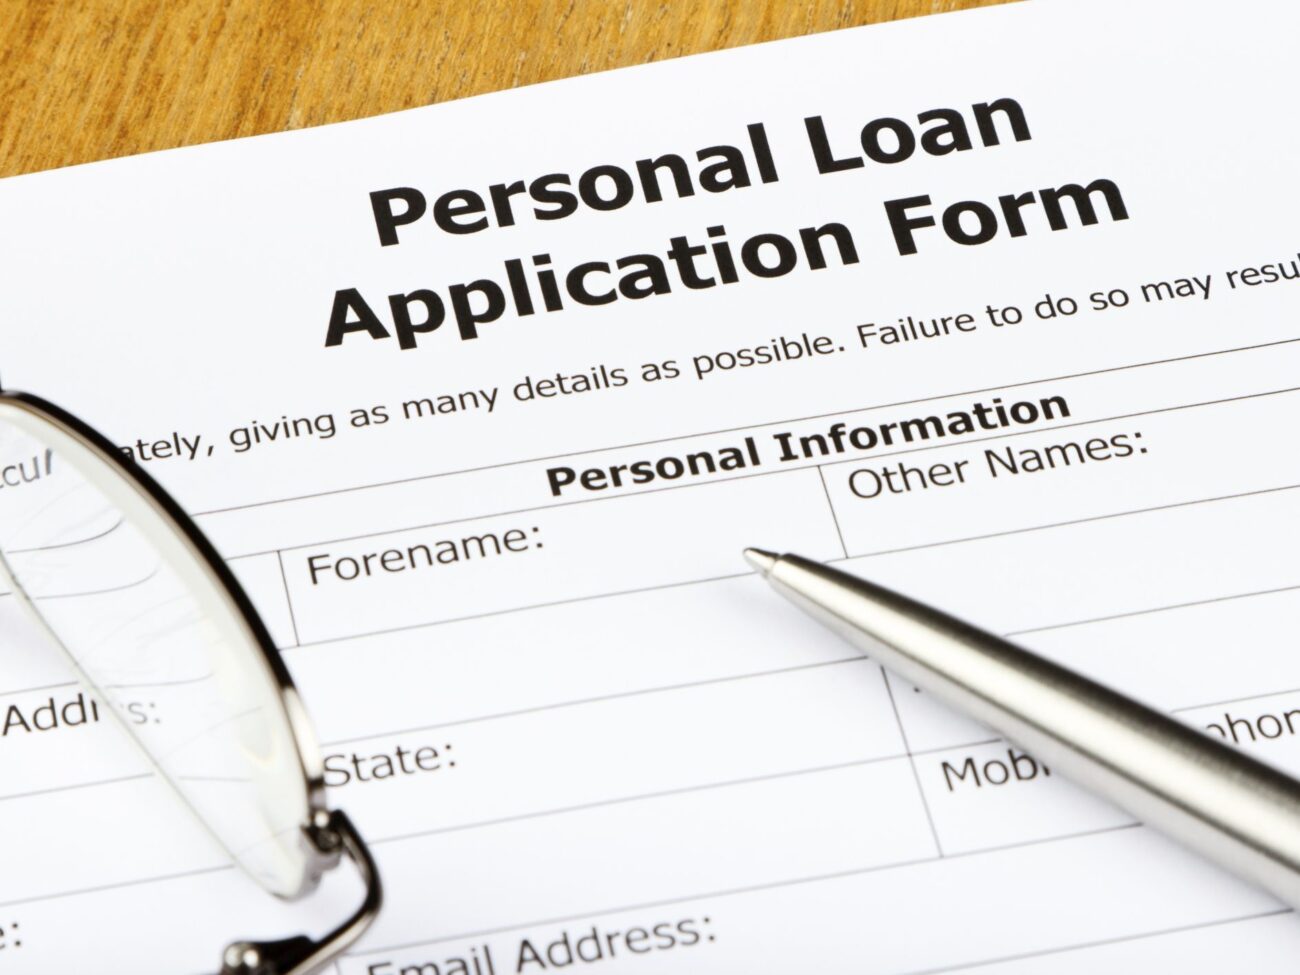 Looking for an unsecured personal loan? It's ideal to invest some energy exploring the most dependable and reliable loan specialists on the web.